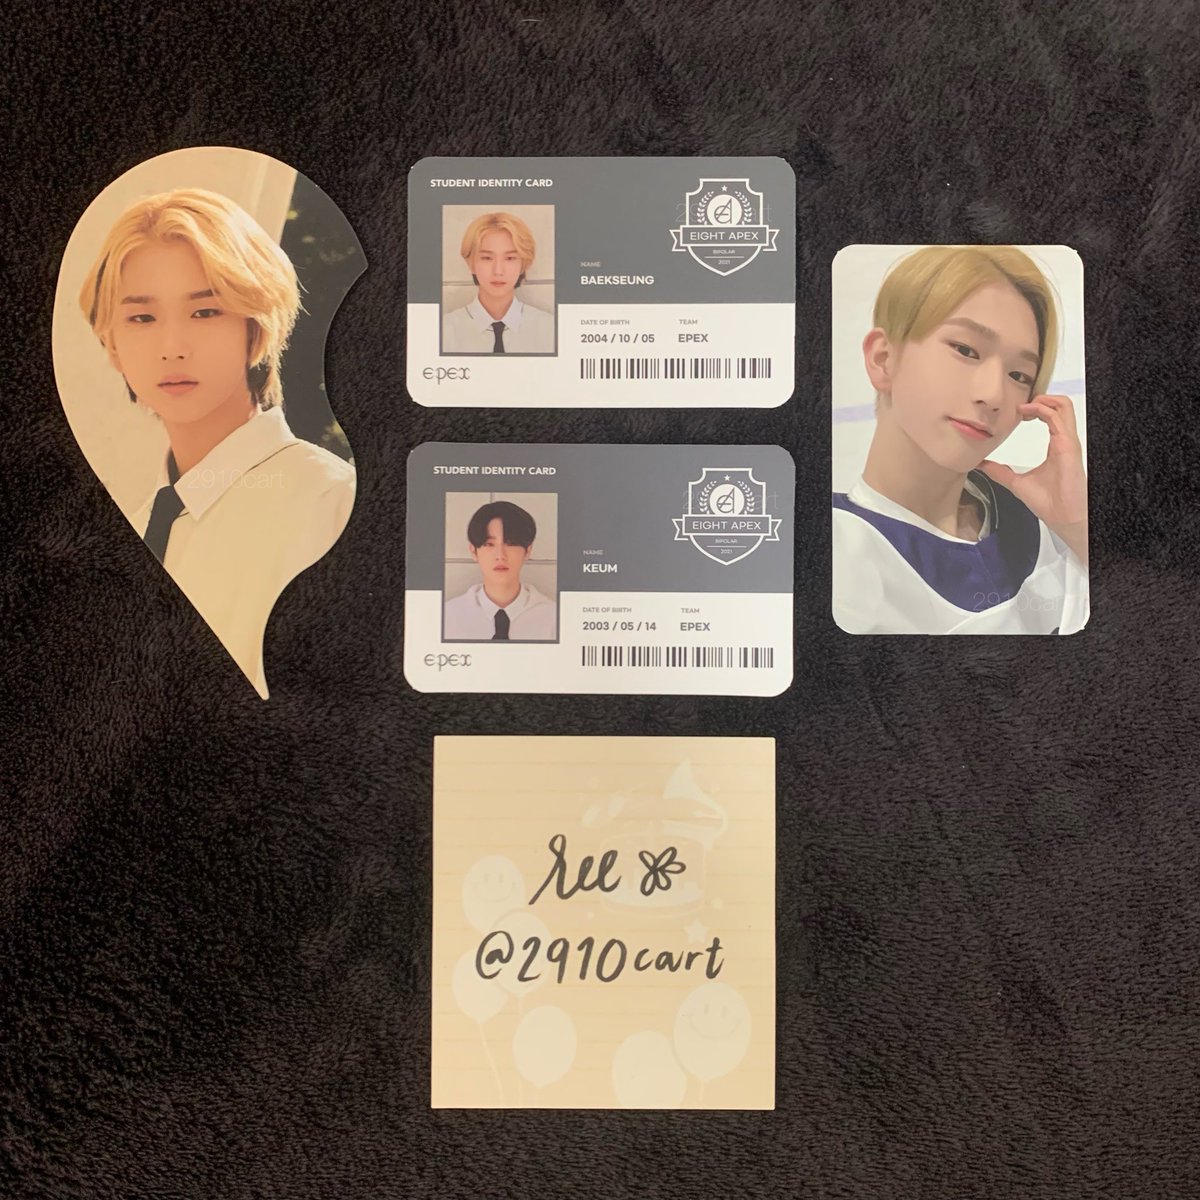 🏷 #2910cartsells | epex album inclusions

— PHP 50 ea (sf & pf excluded)
— mint condition with minimal scratches

🔖 wts lfb ph only rt official bipolar prelude of anxiety love photocard id message card reality companion baekseung keum donghyun